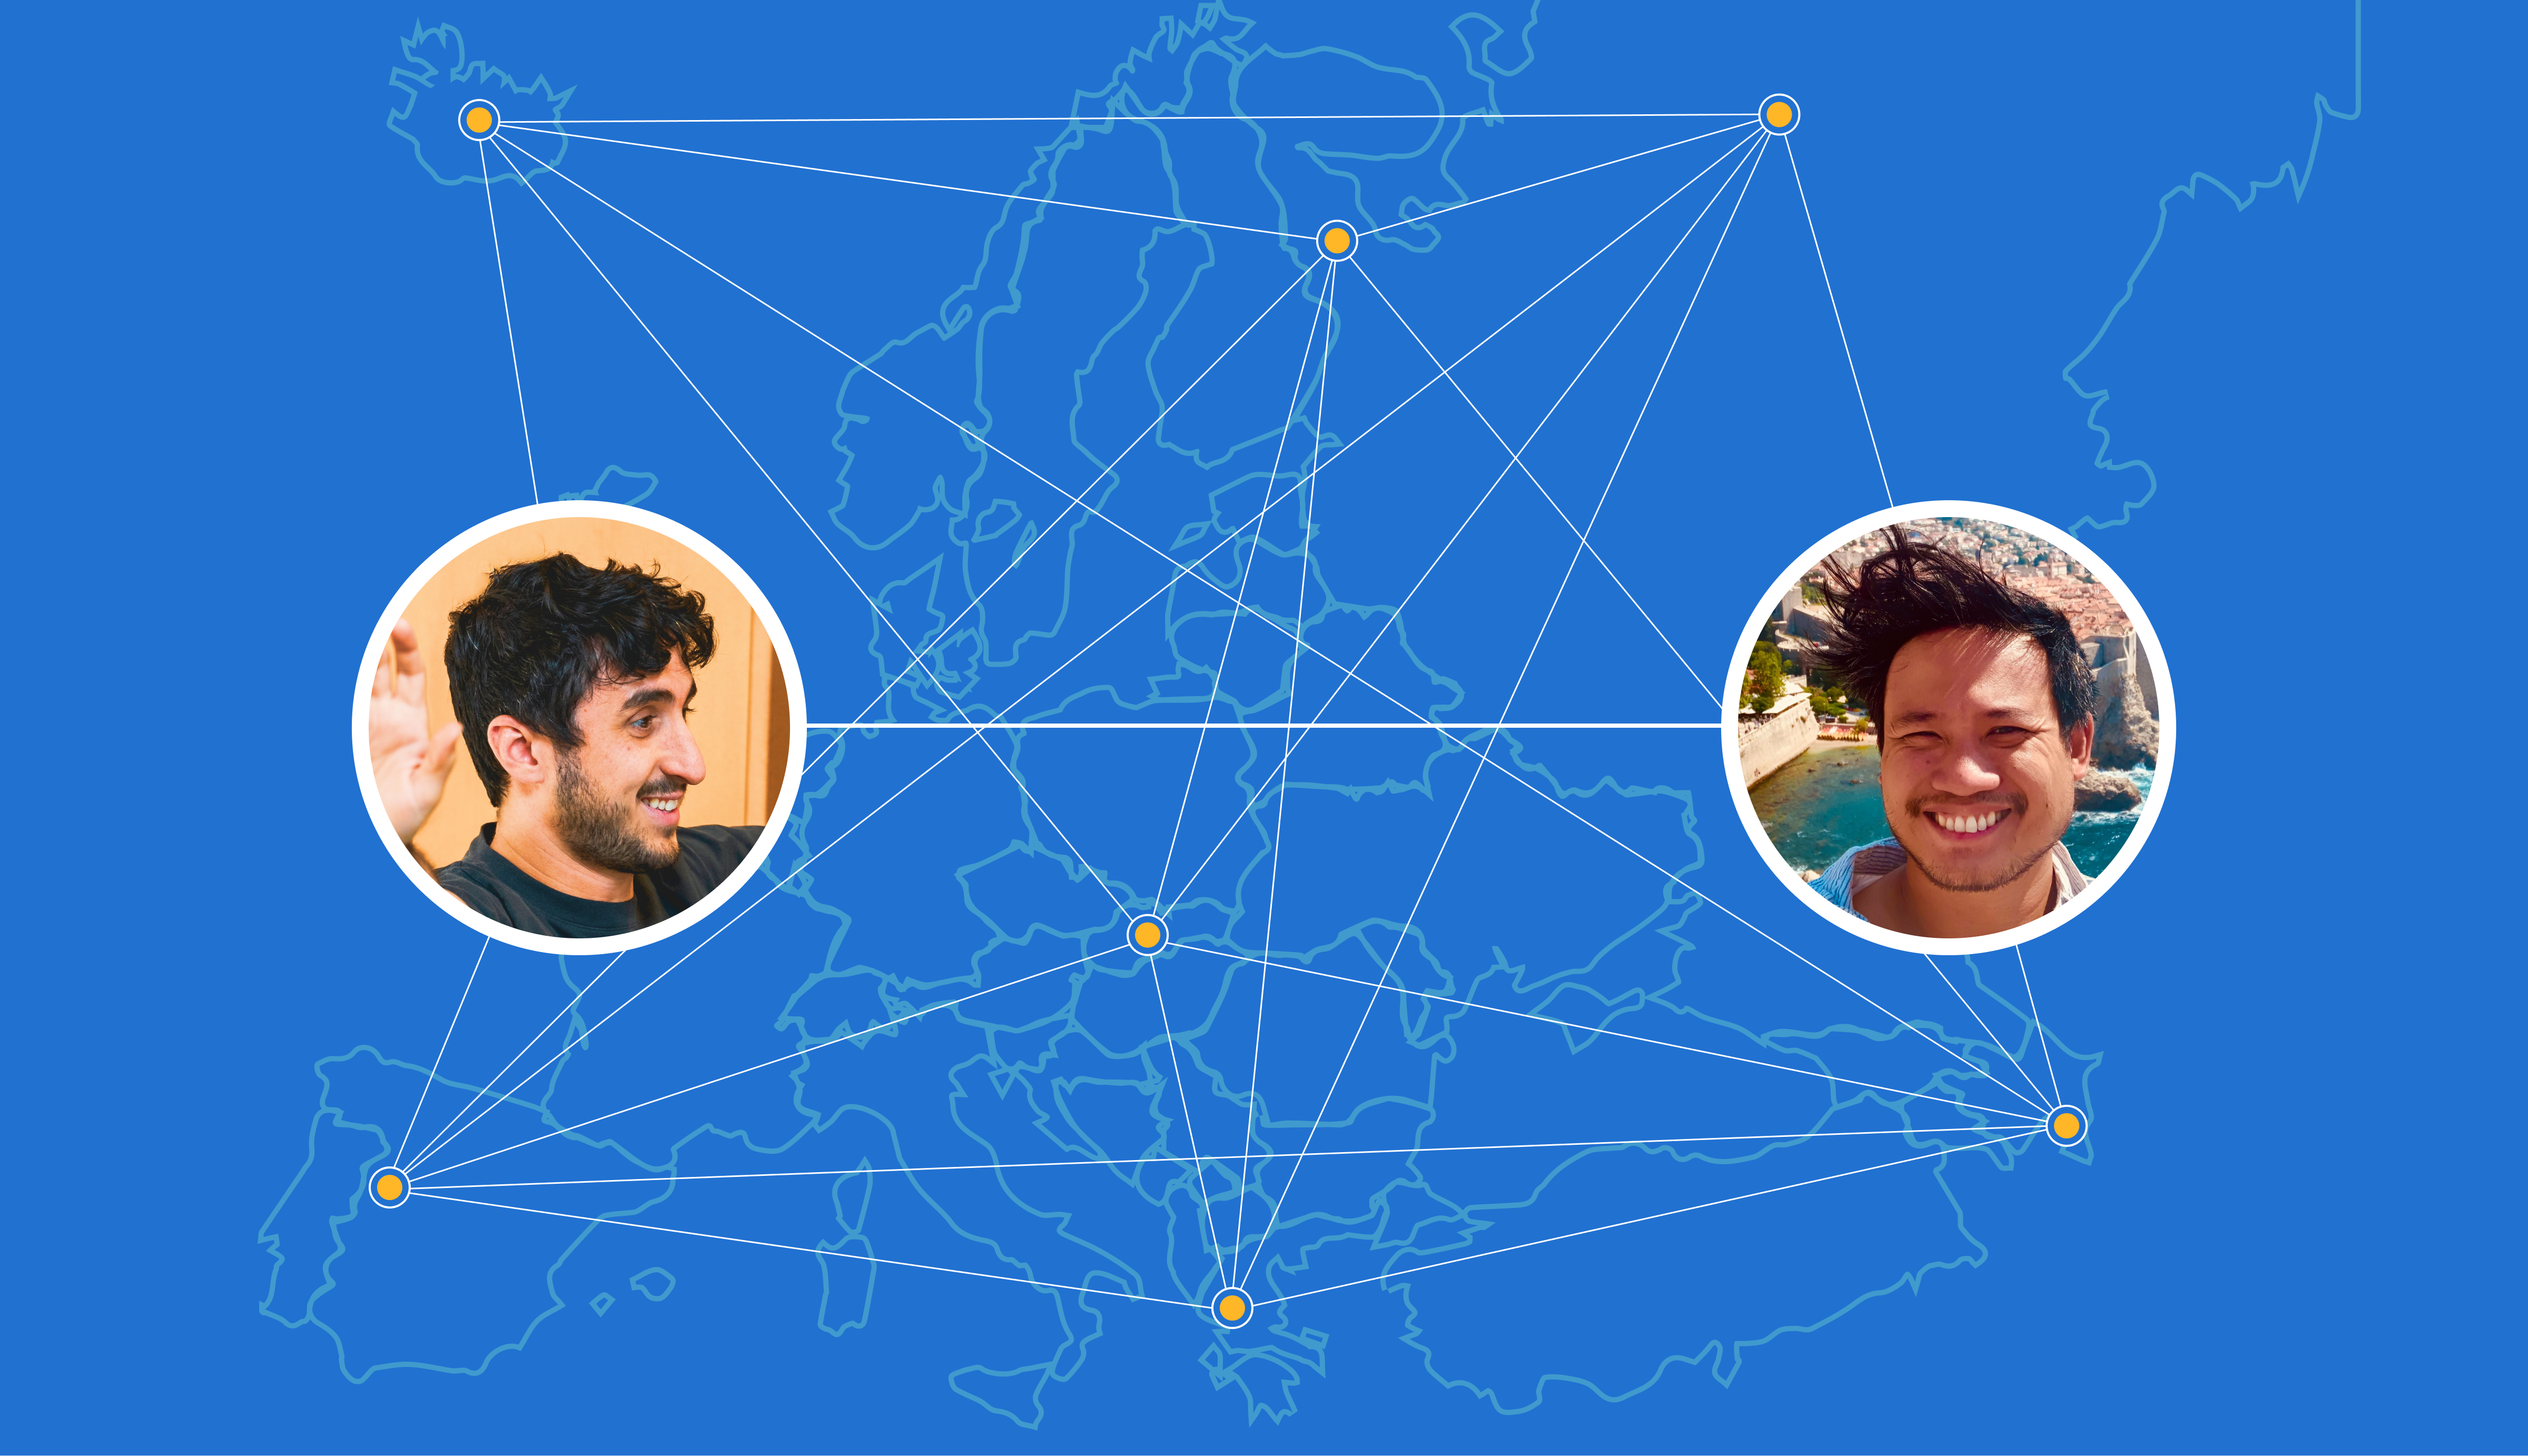 Map outline of Europe against a bright blue background, with dots and lines representing travel paths, and headshots of two employees in circle cutouts.